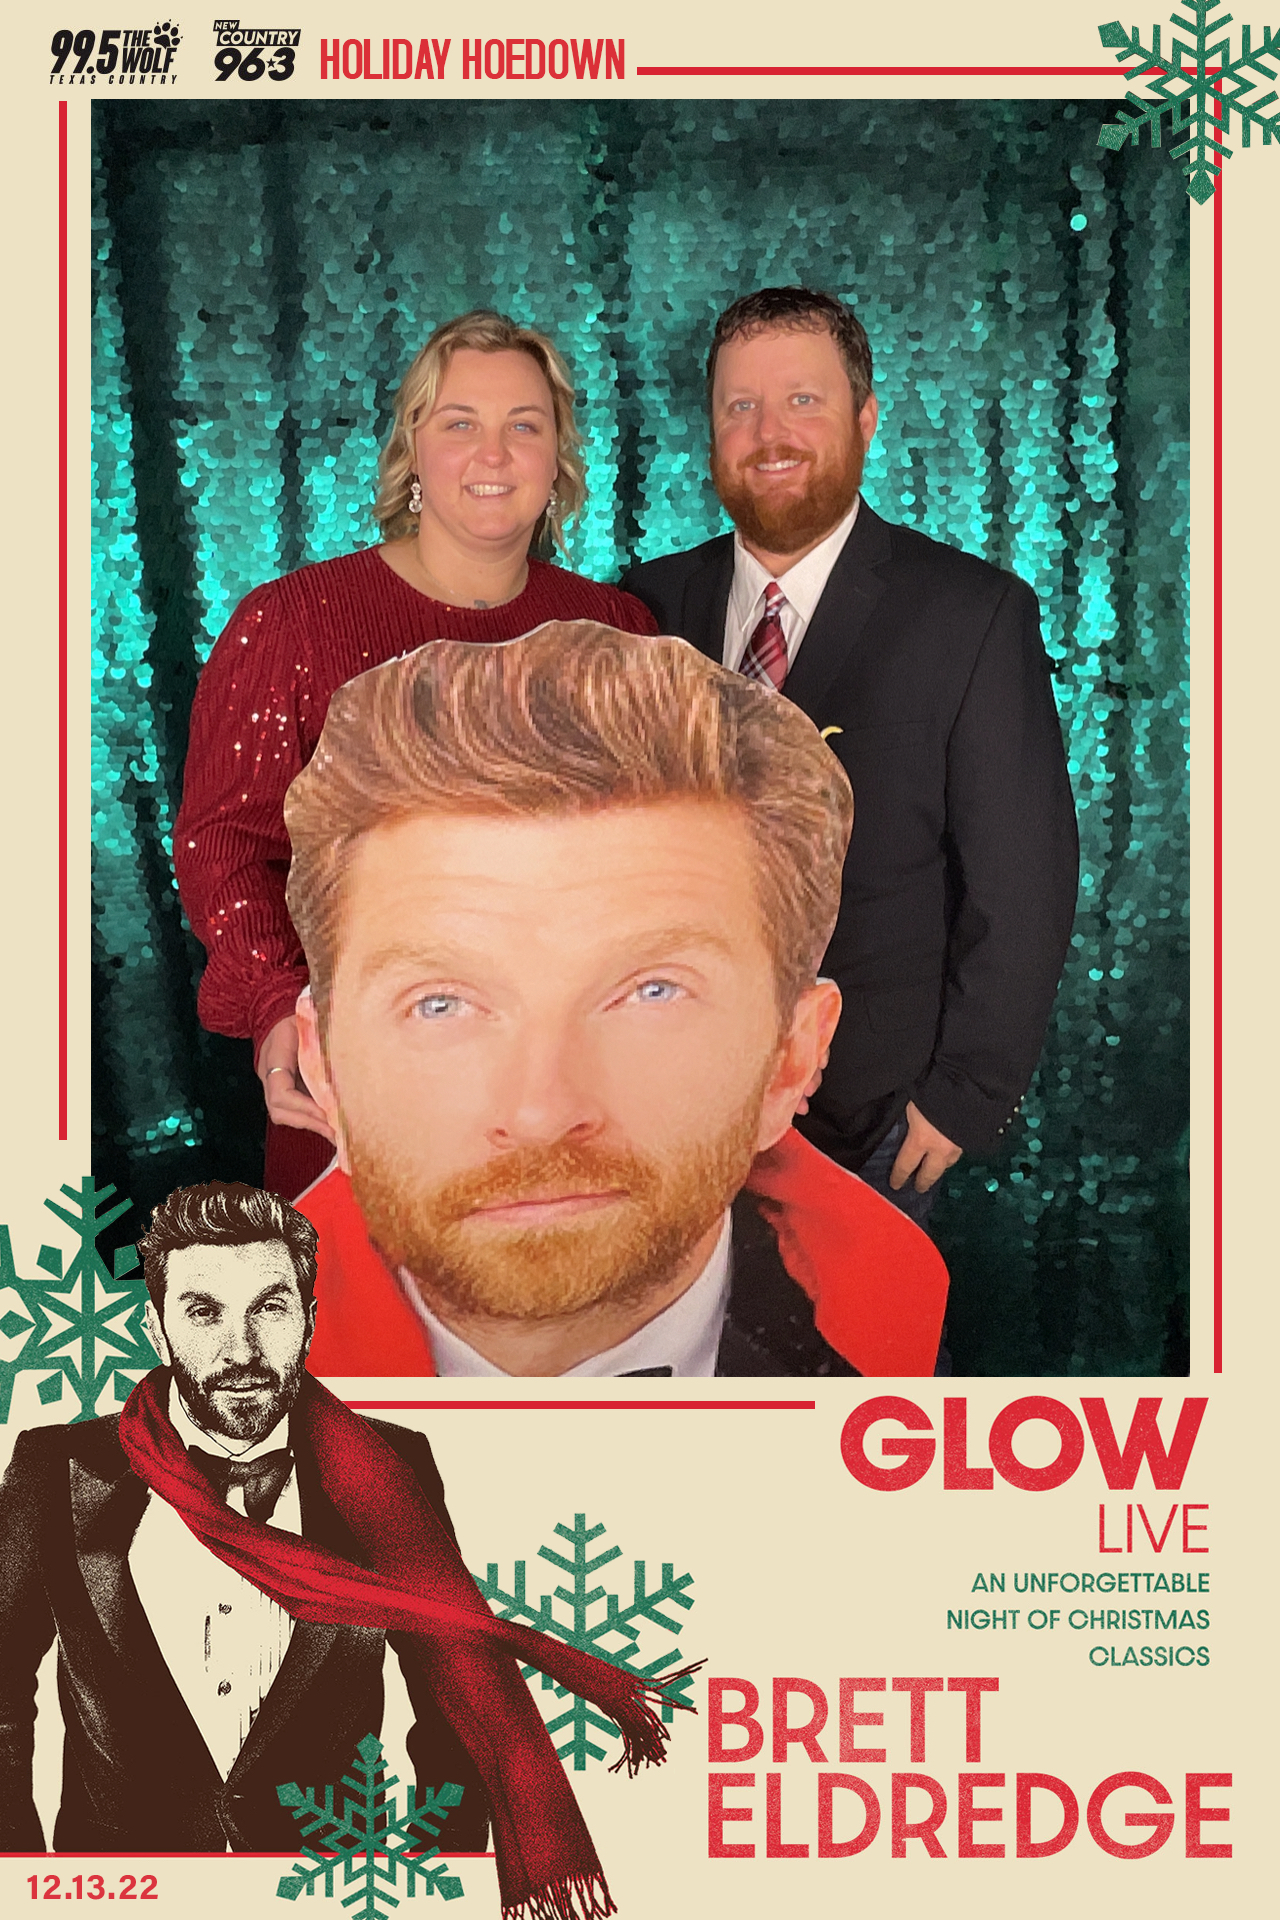 Holiday Hoedown Photo Booth Photos